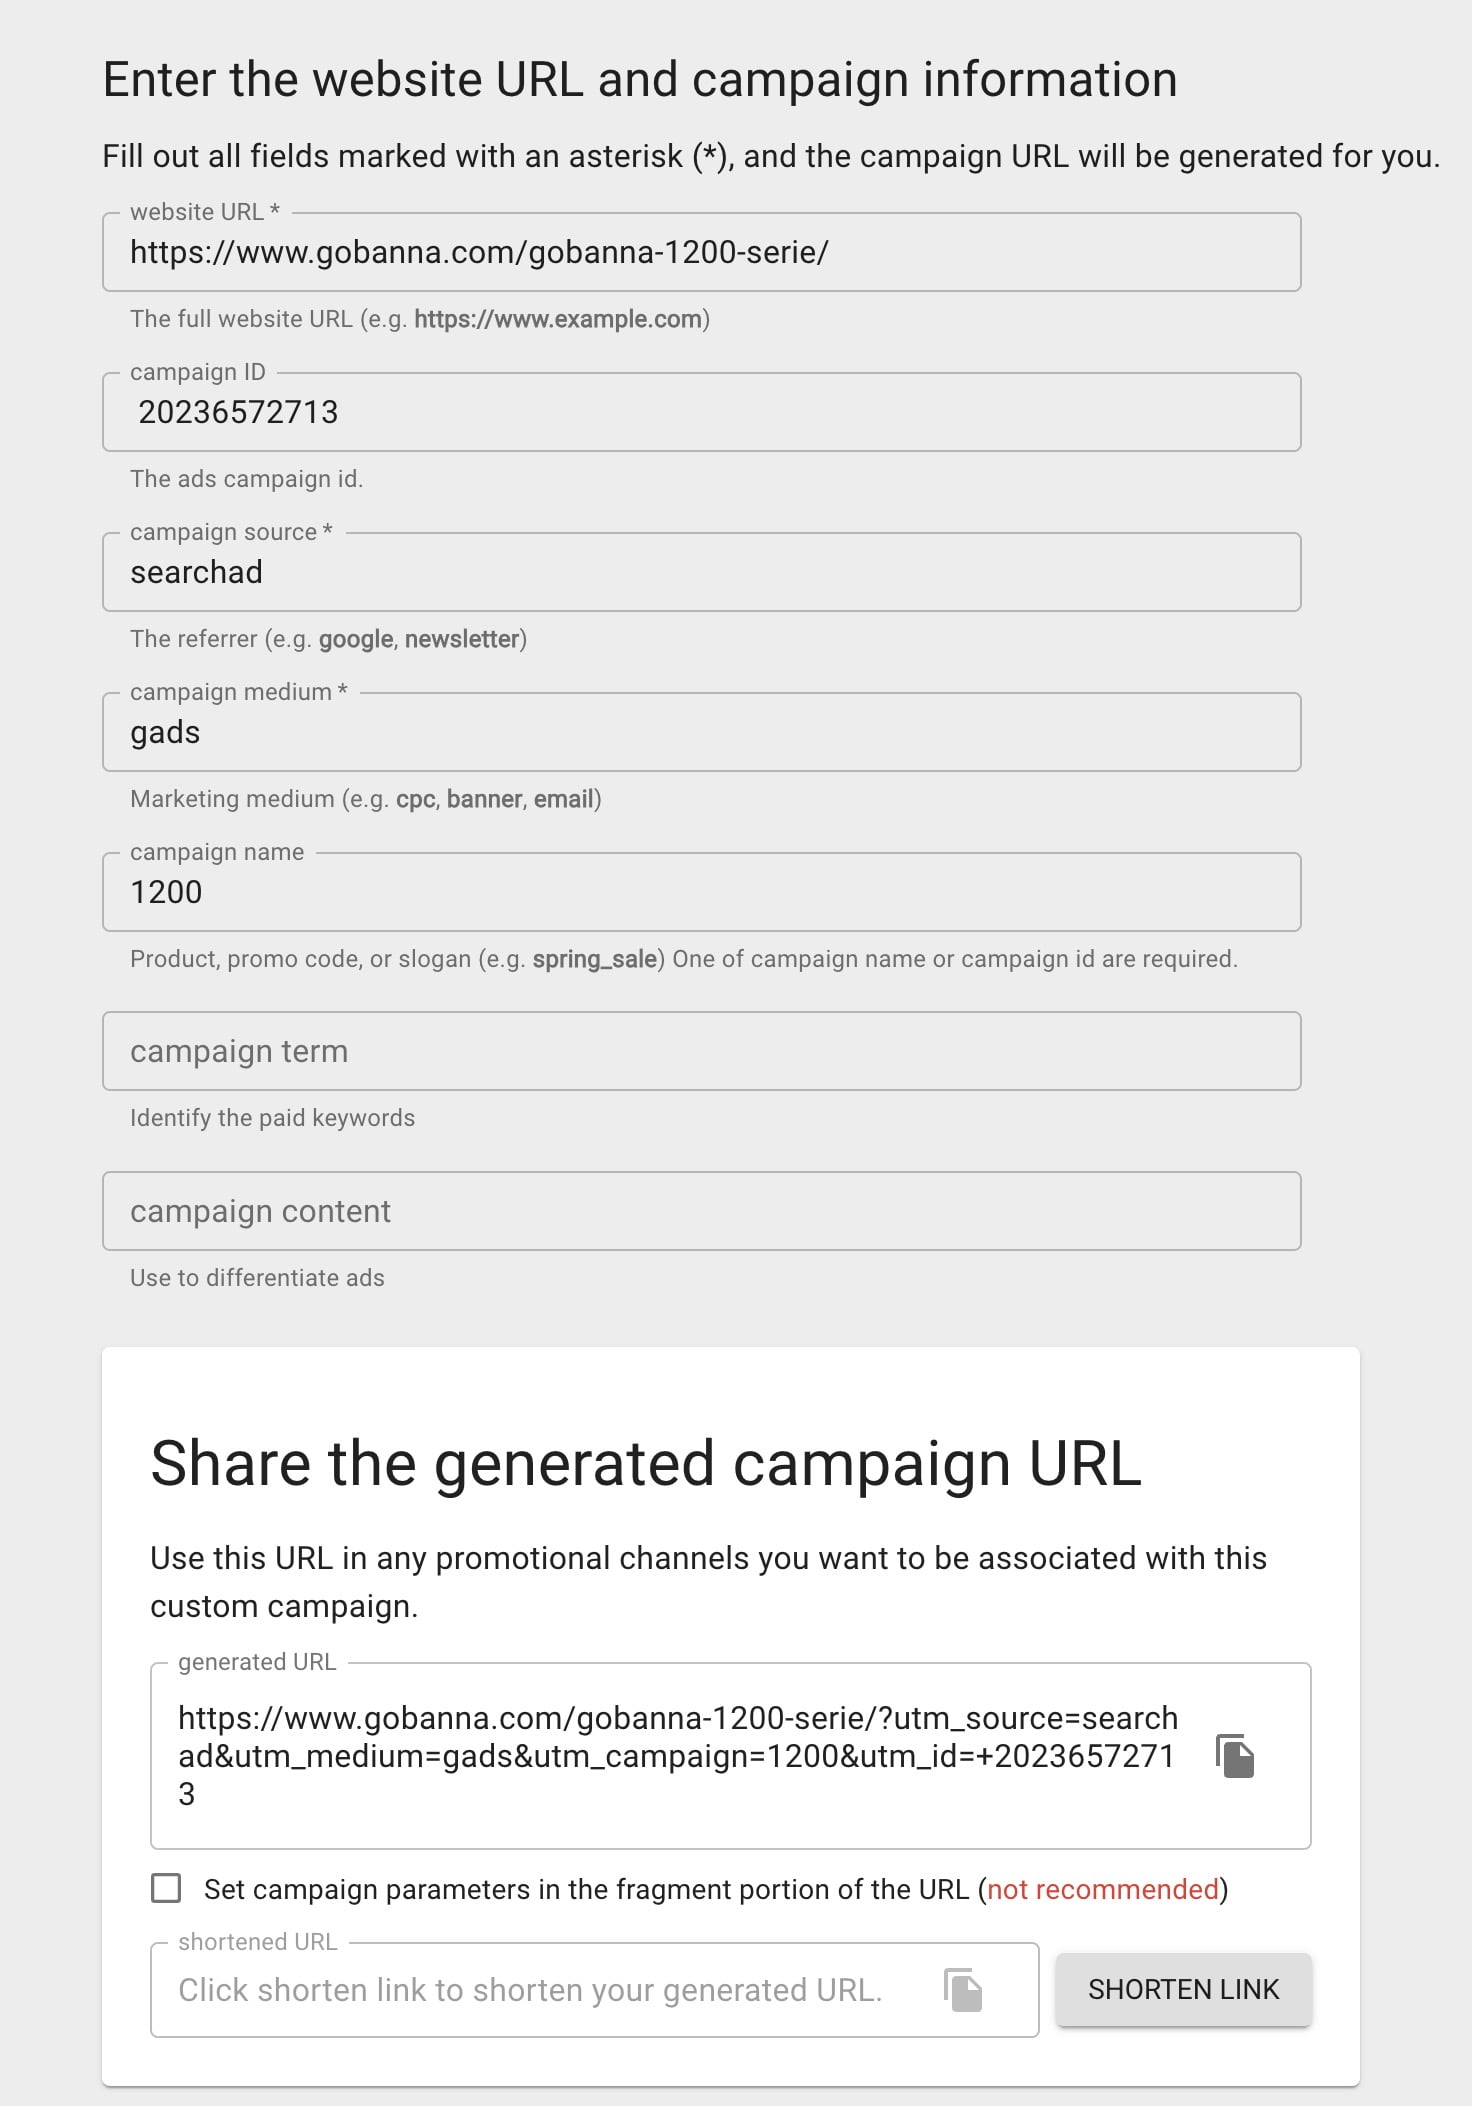 Build UTM link | How to create an UTM link using this tool -- House of Brands Media